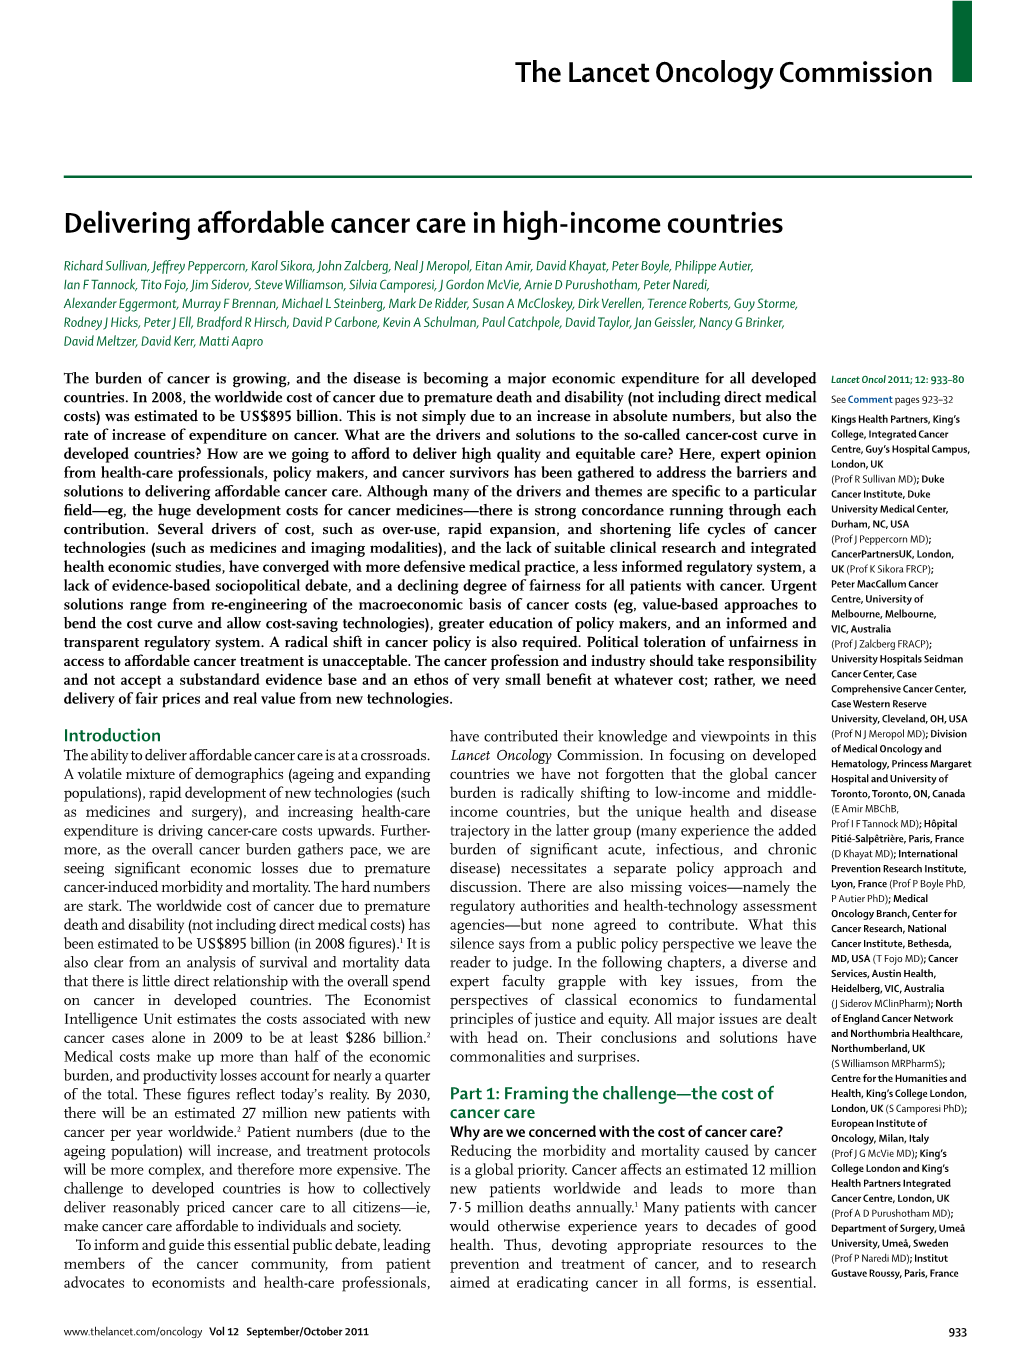 Delivering Affordable Cancer Care in High-Income Countries